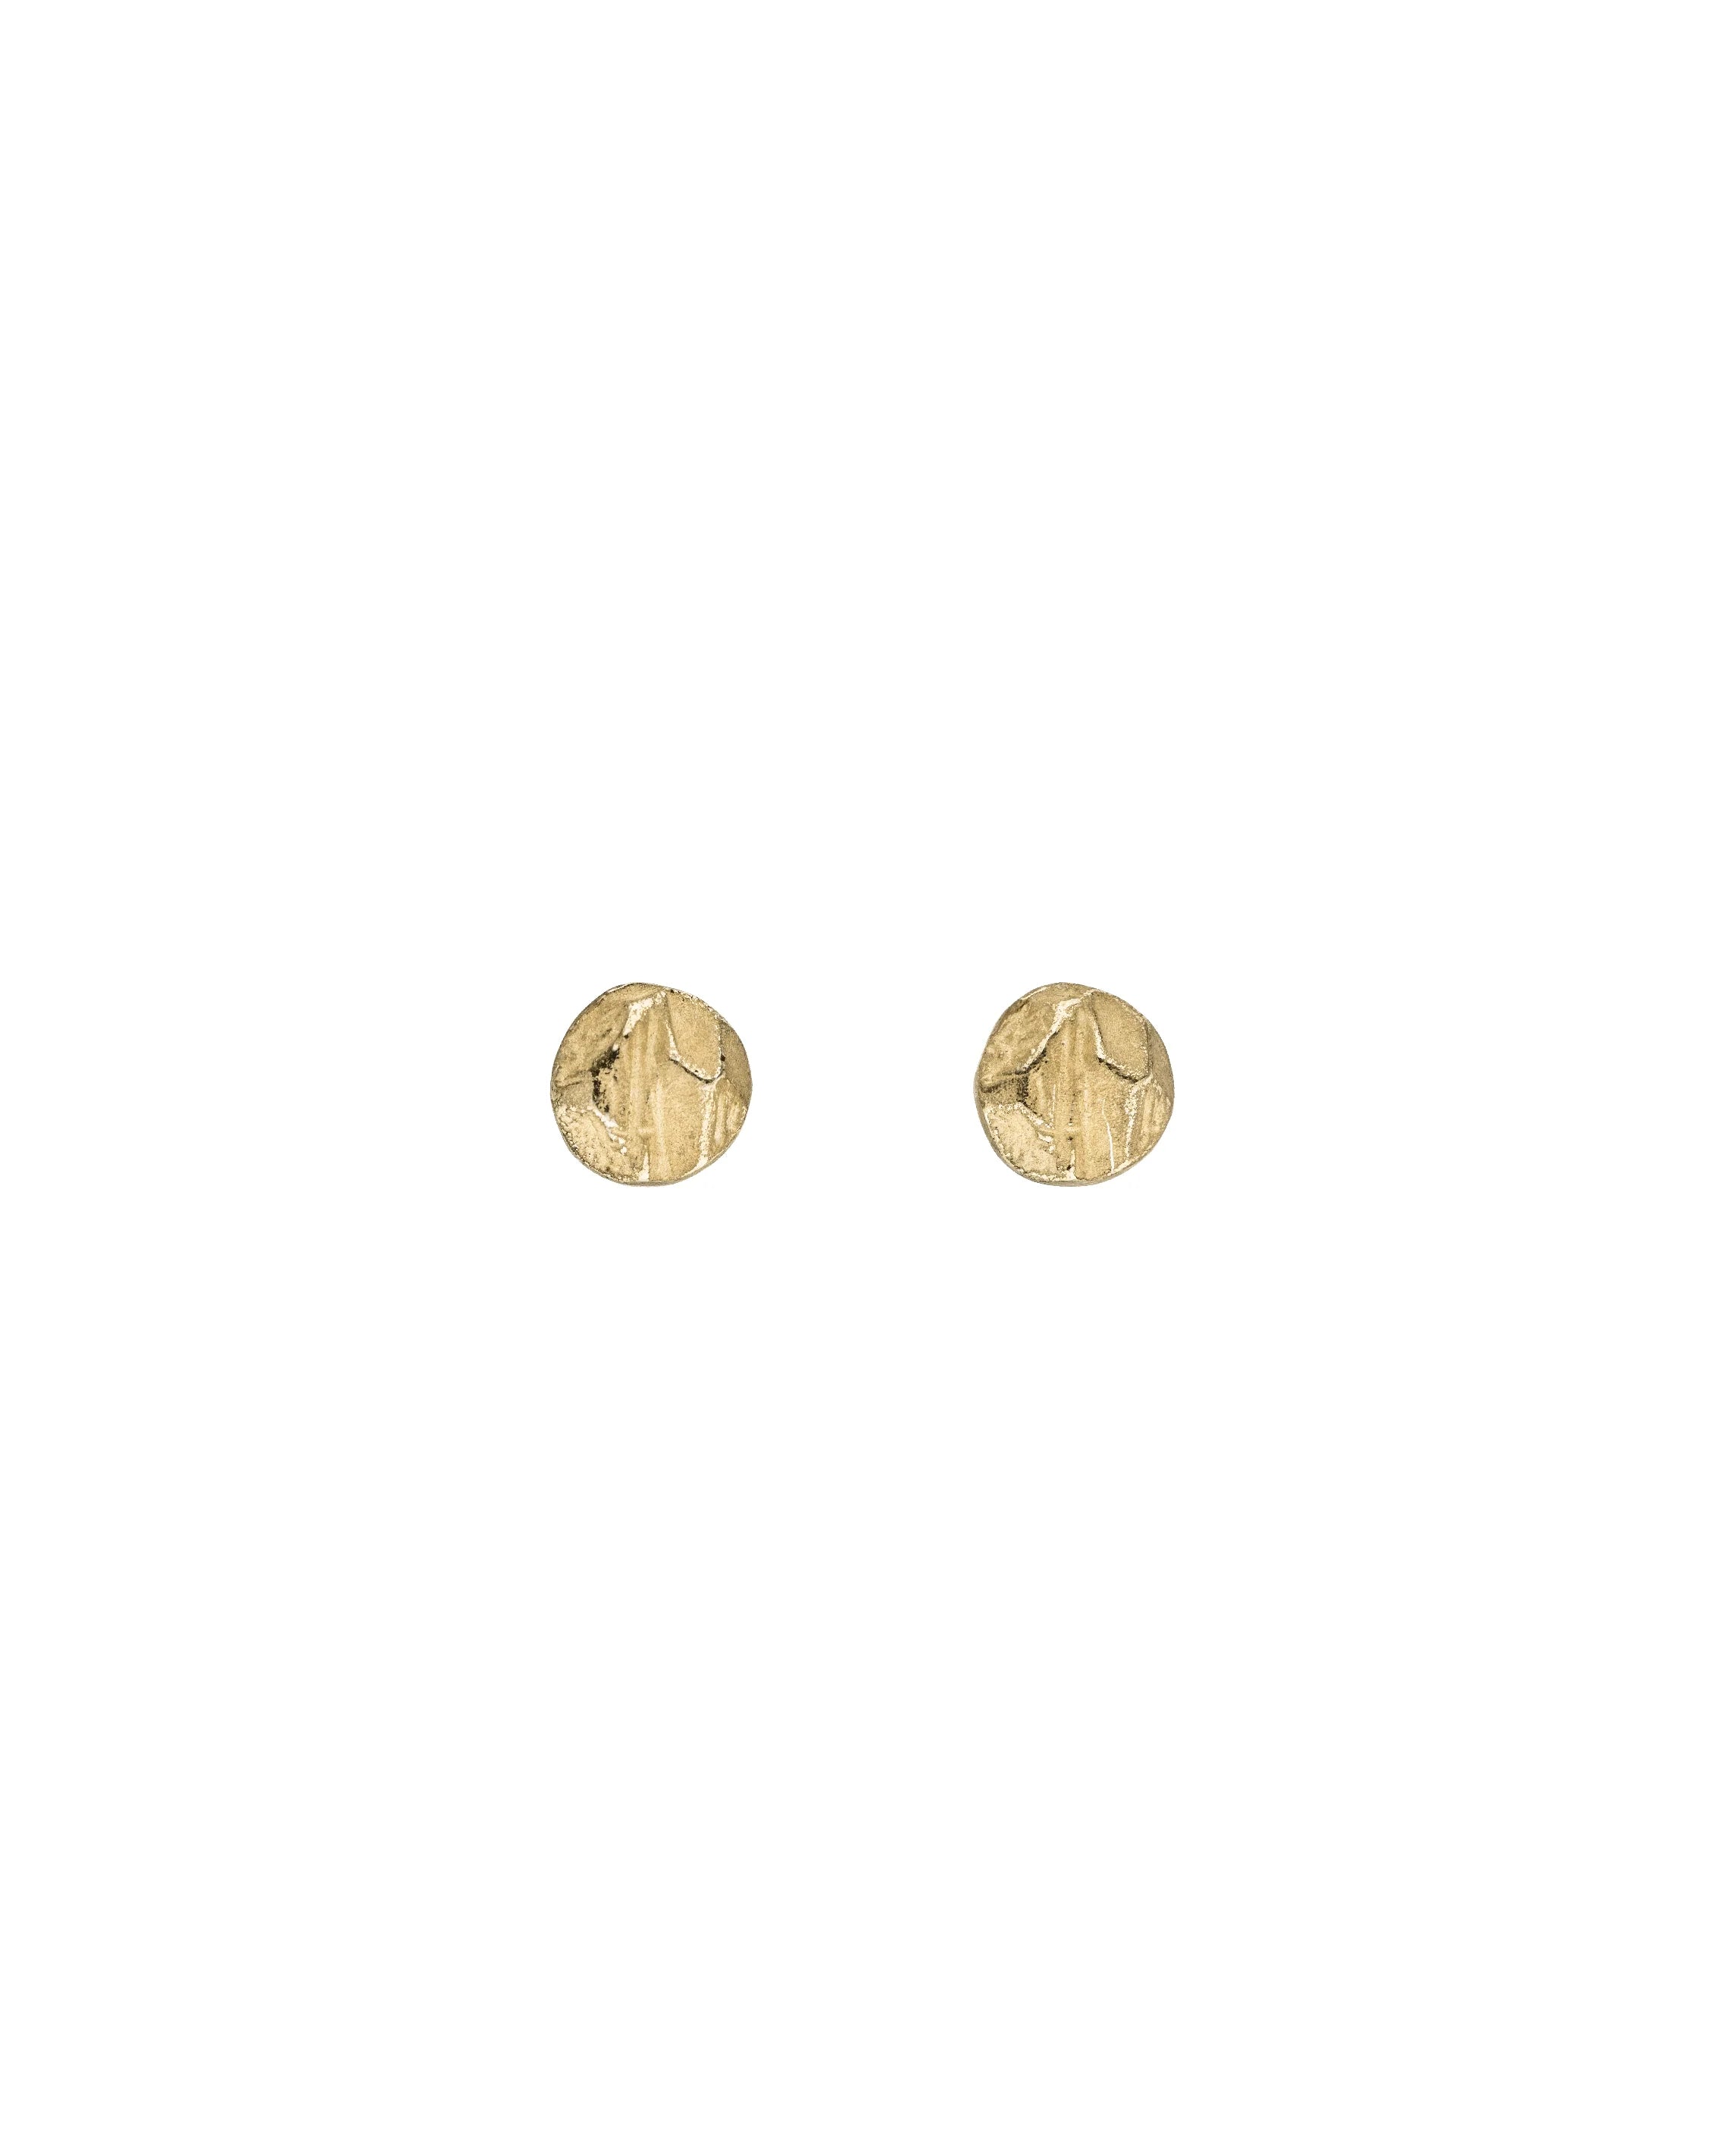 STONE - Ohrringe Gold - Small Ohrstecker Gelbgold 585